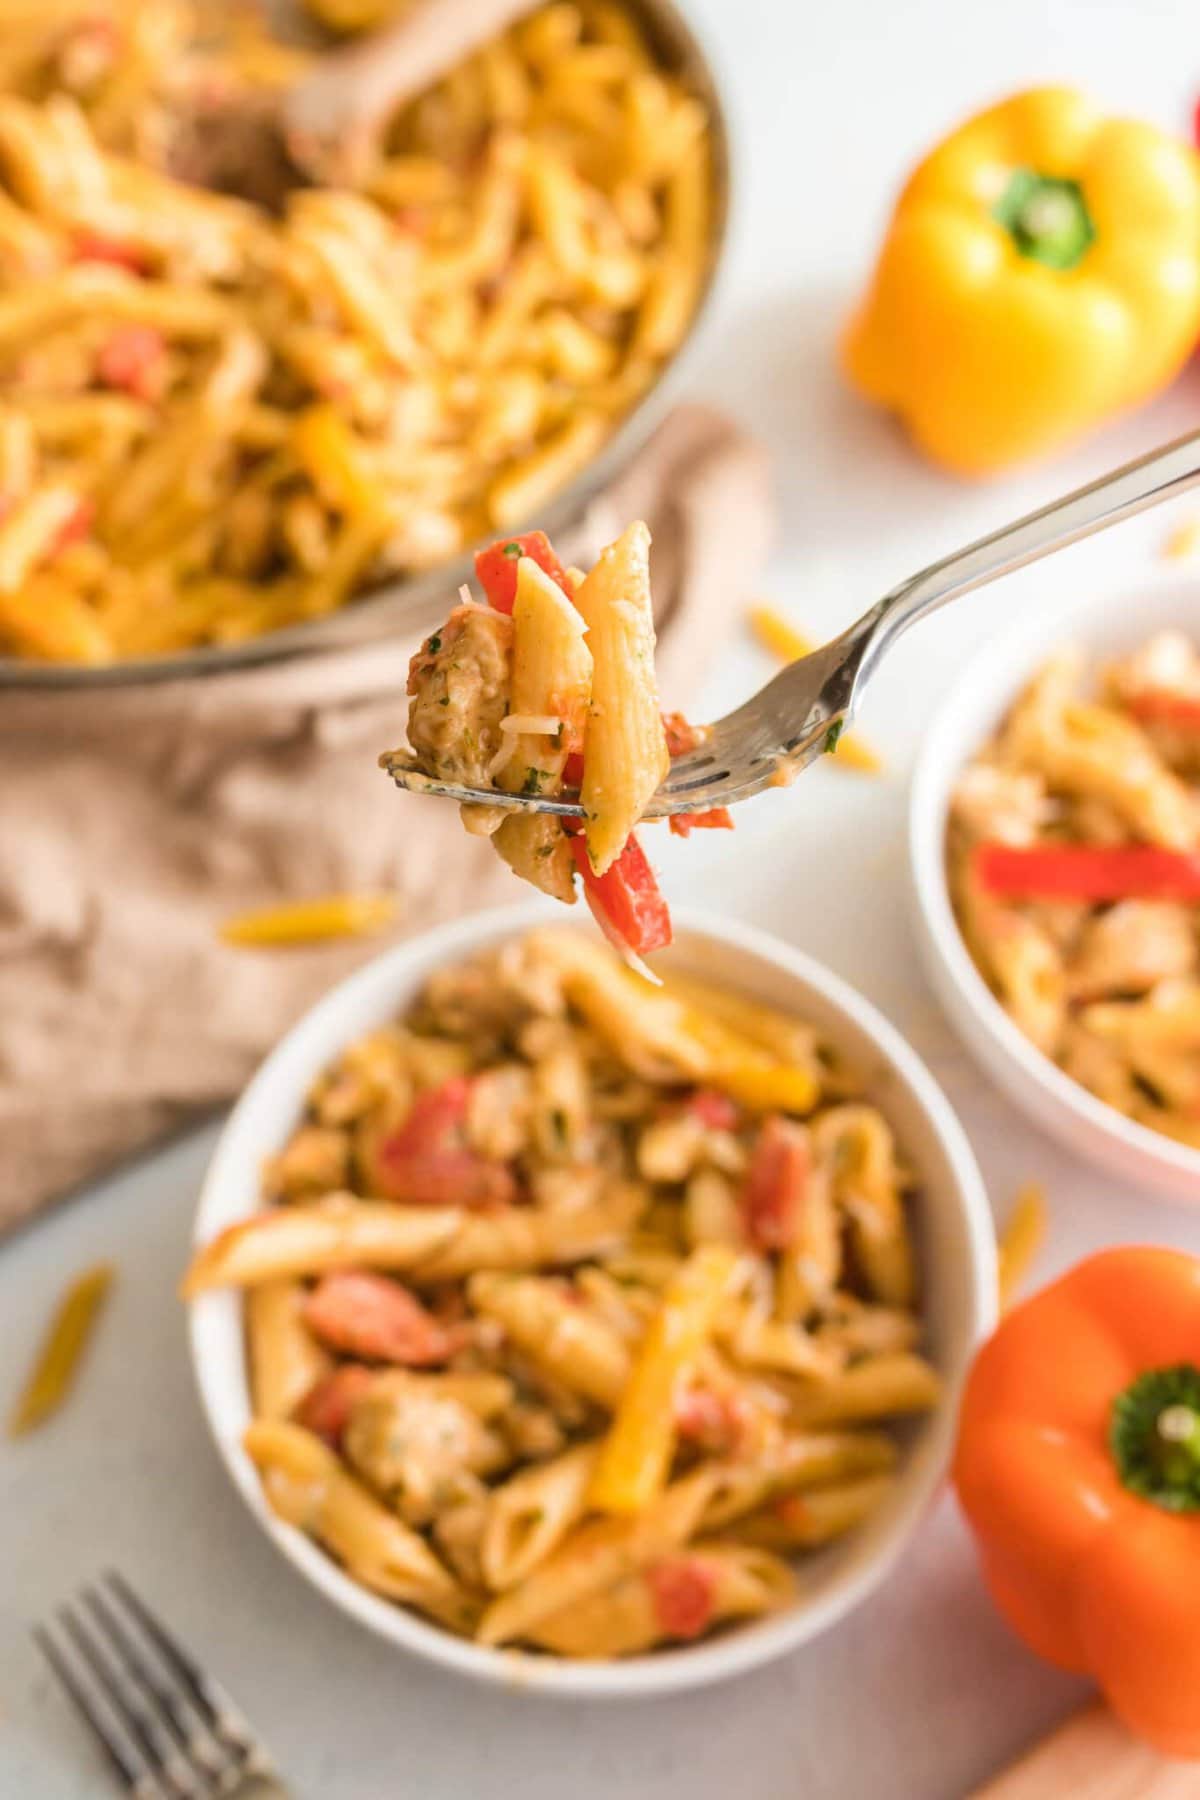 A fork lifting up some of the Cajun Chicken Pasta.